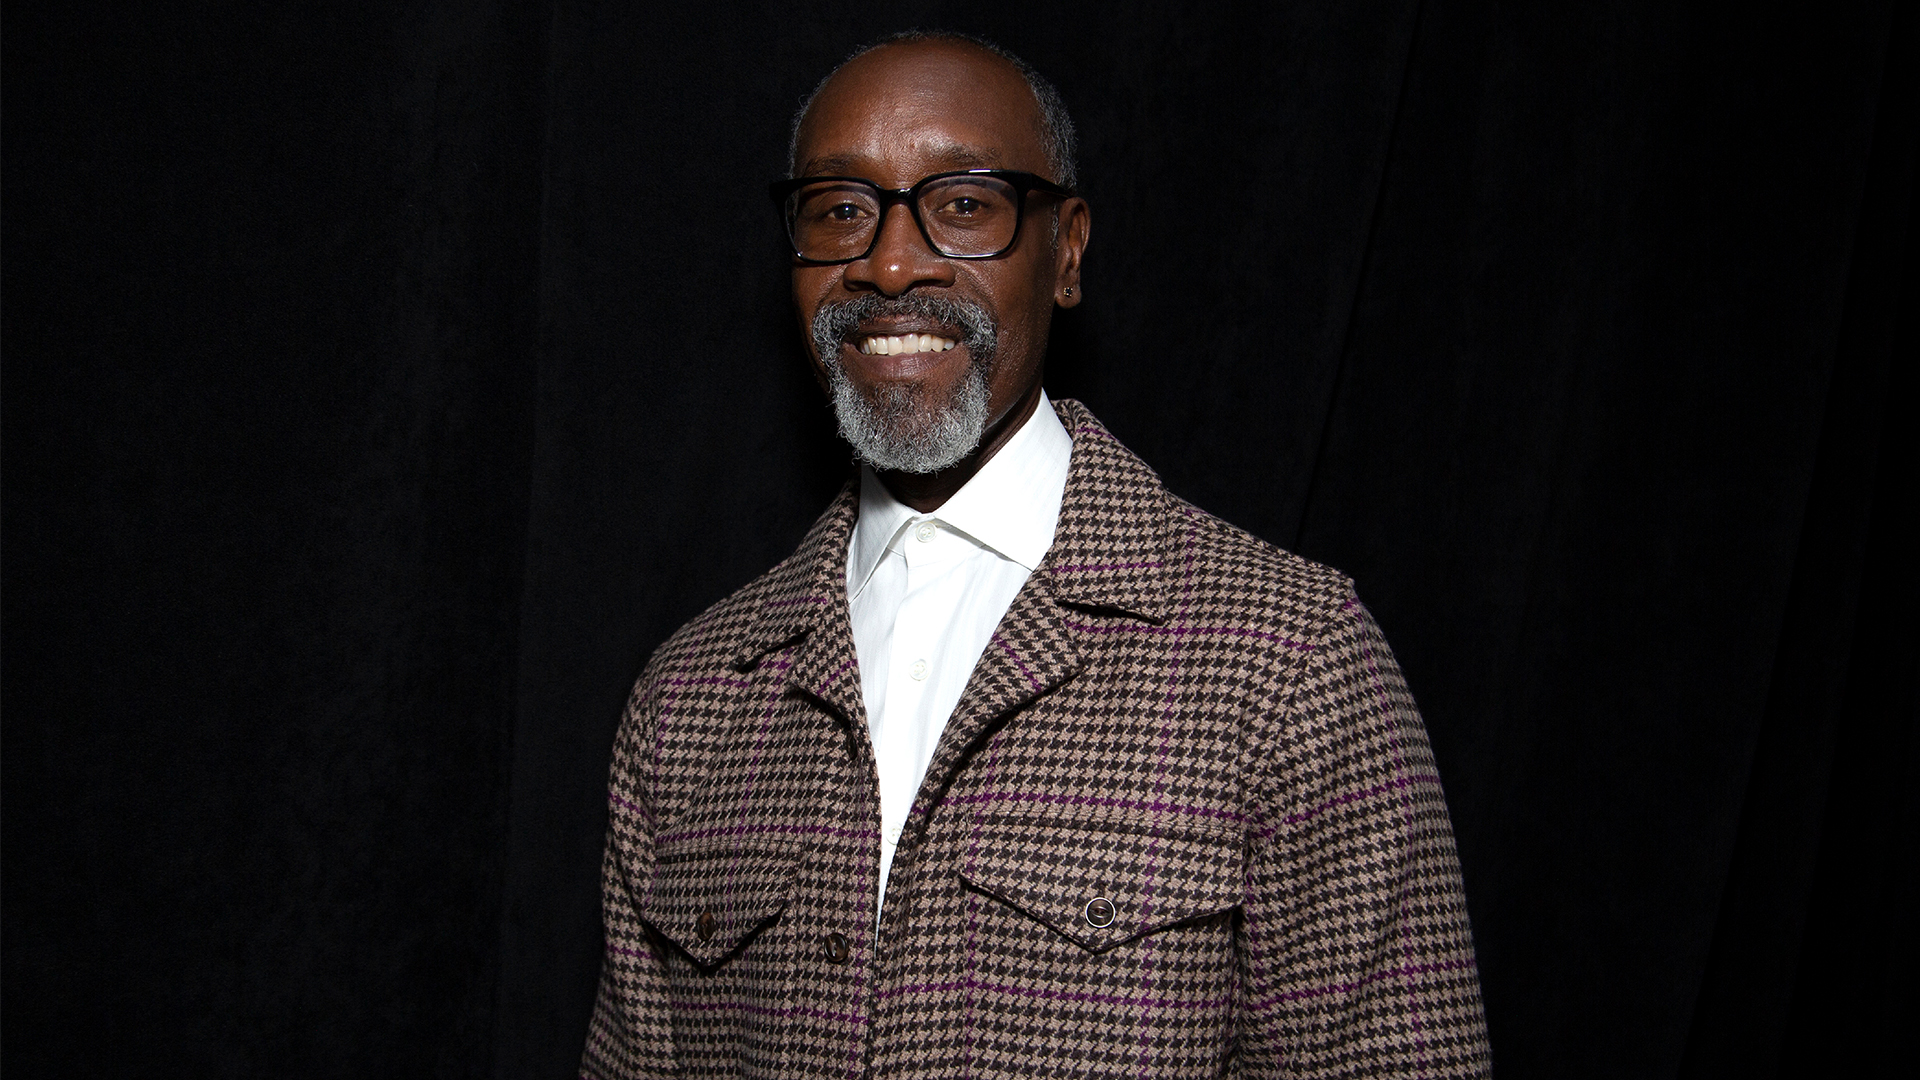 Don Cheadle On How Marvel Offered His Six-Movie Deal: 'If You Don't Say Yes, We're Going To The Next Person'